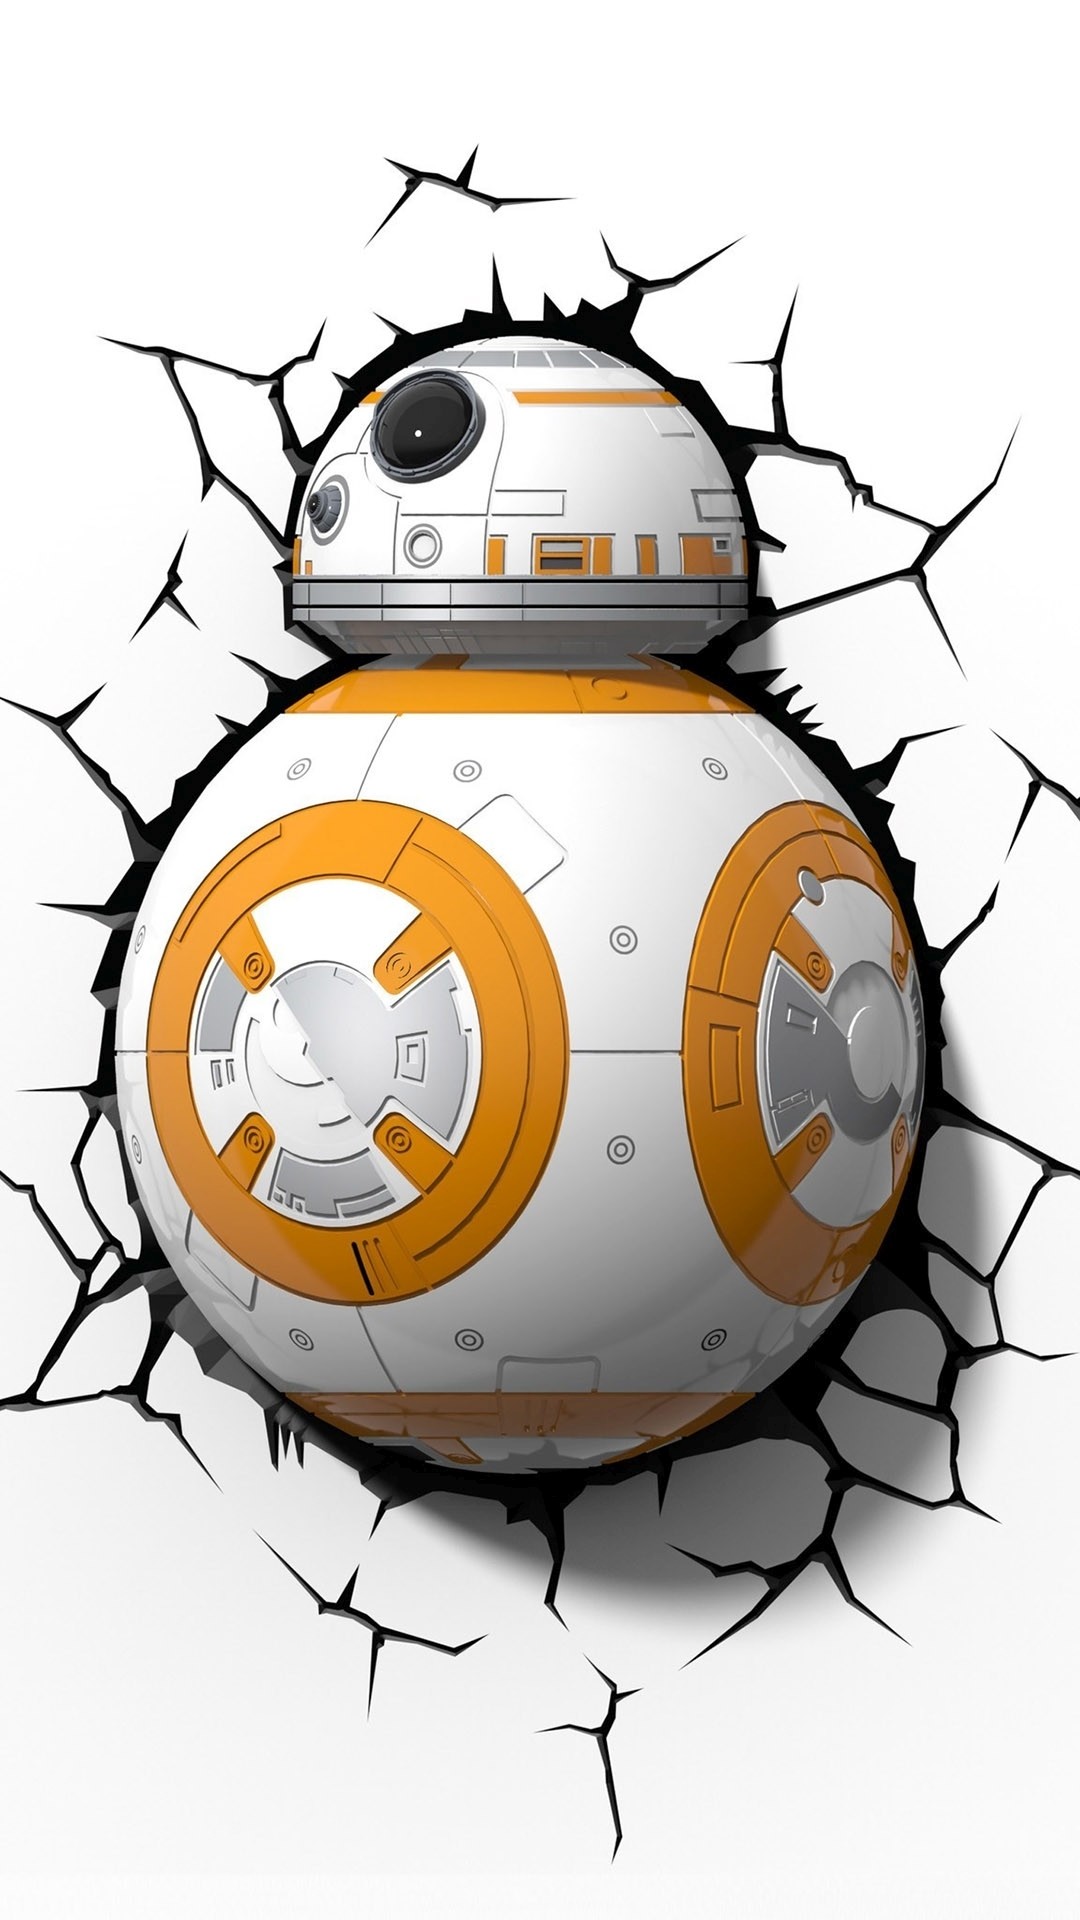 BB 8 in a wall – Star Wars Episode VII – The Force Awakens Wallpaper